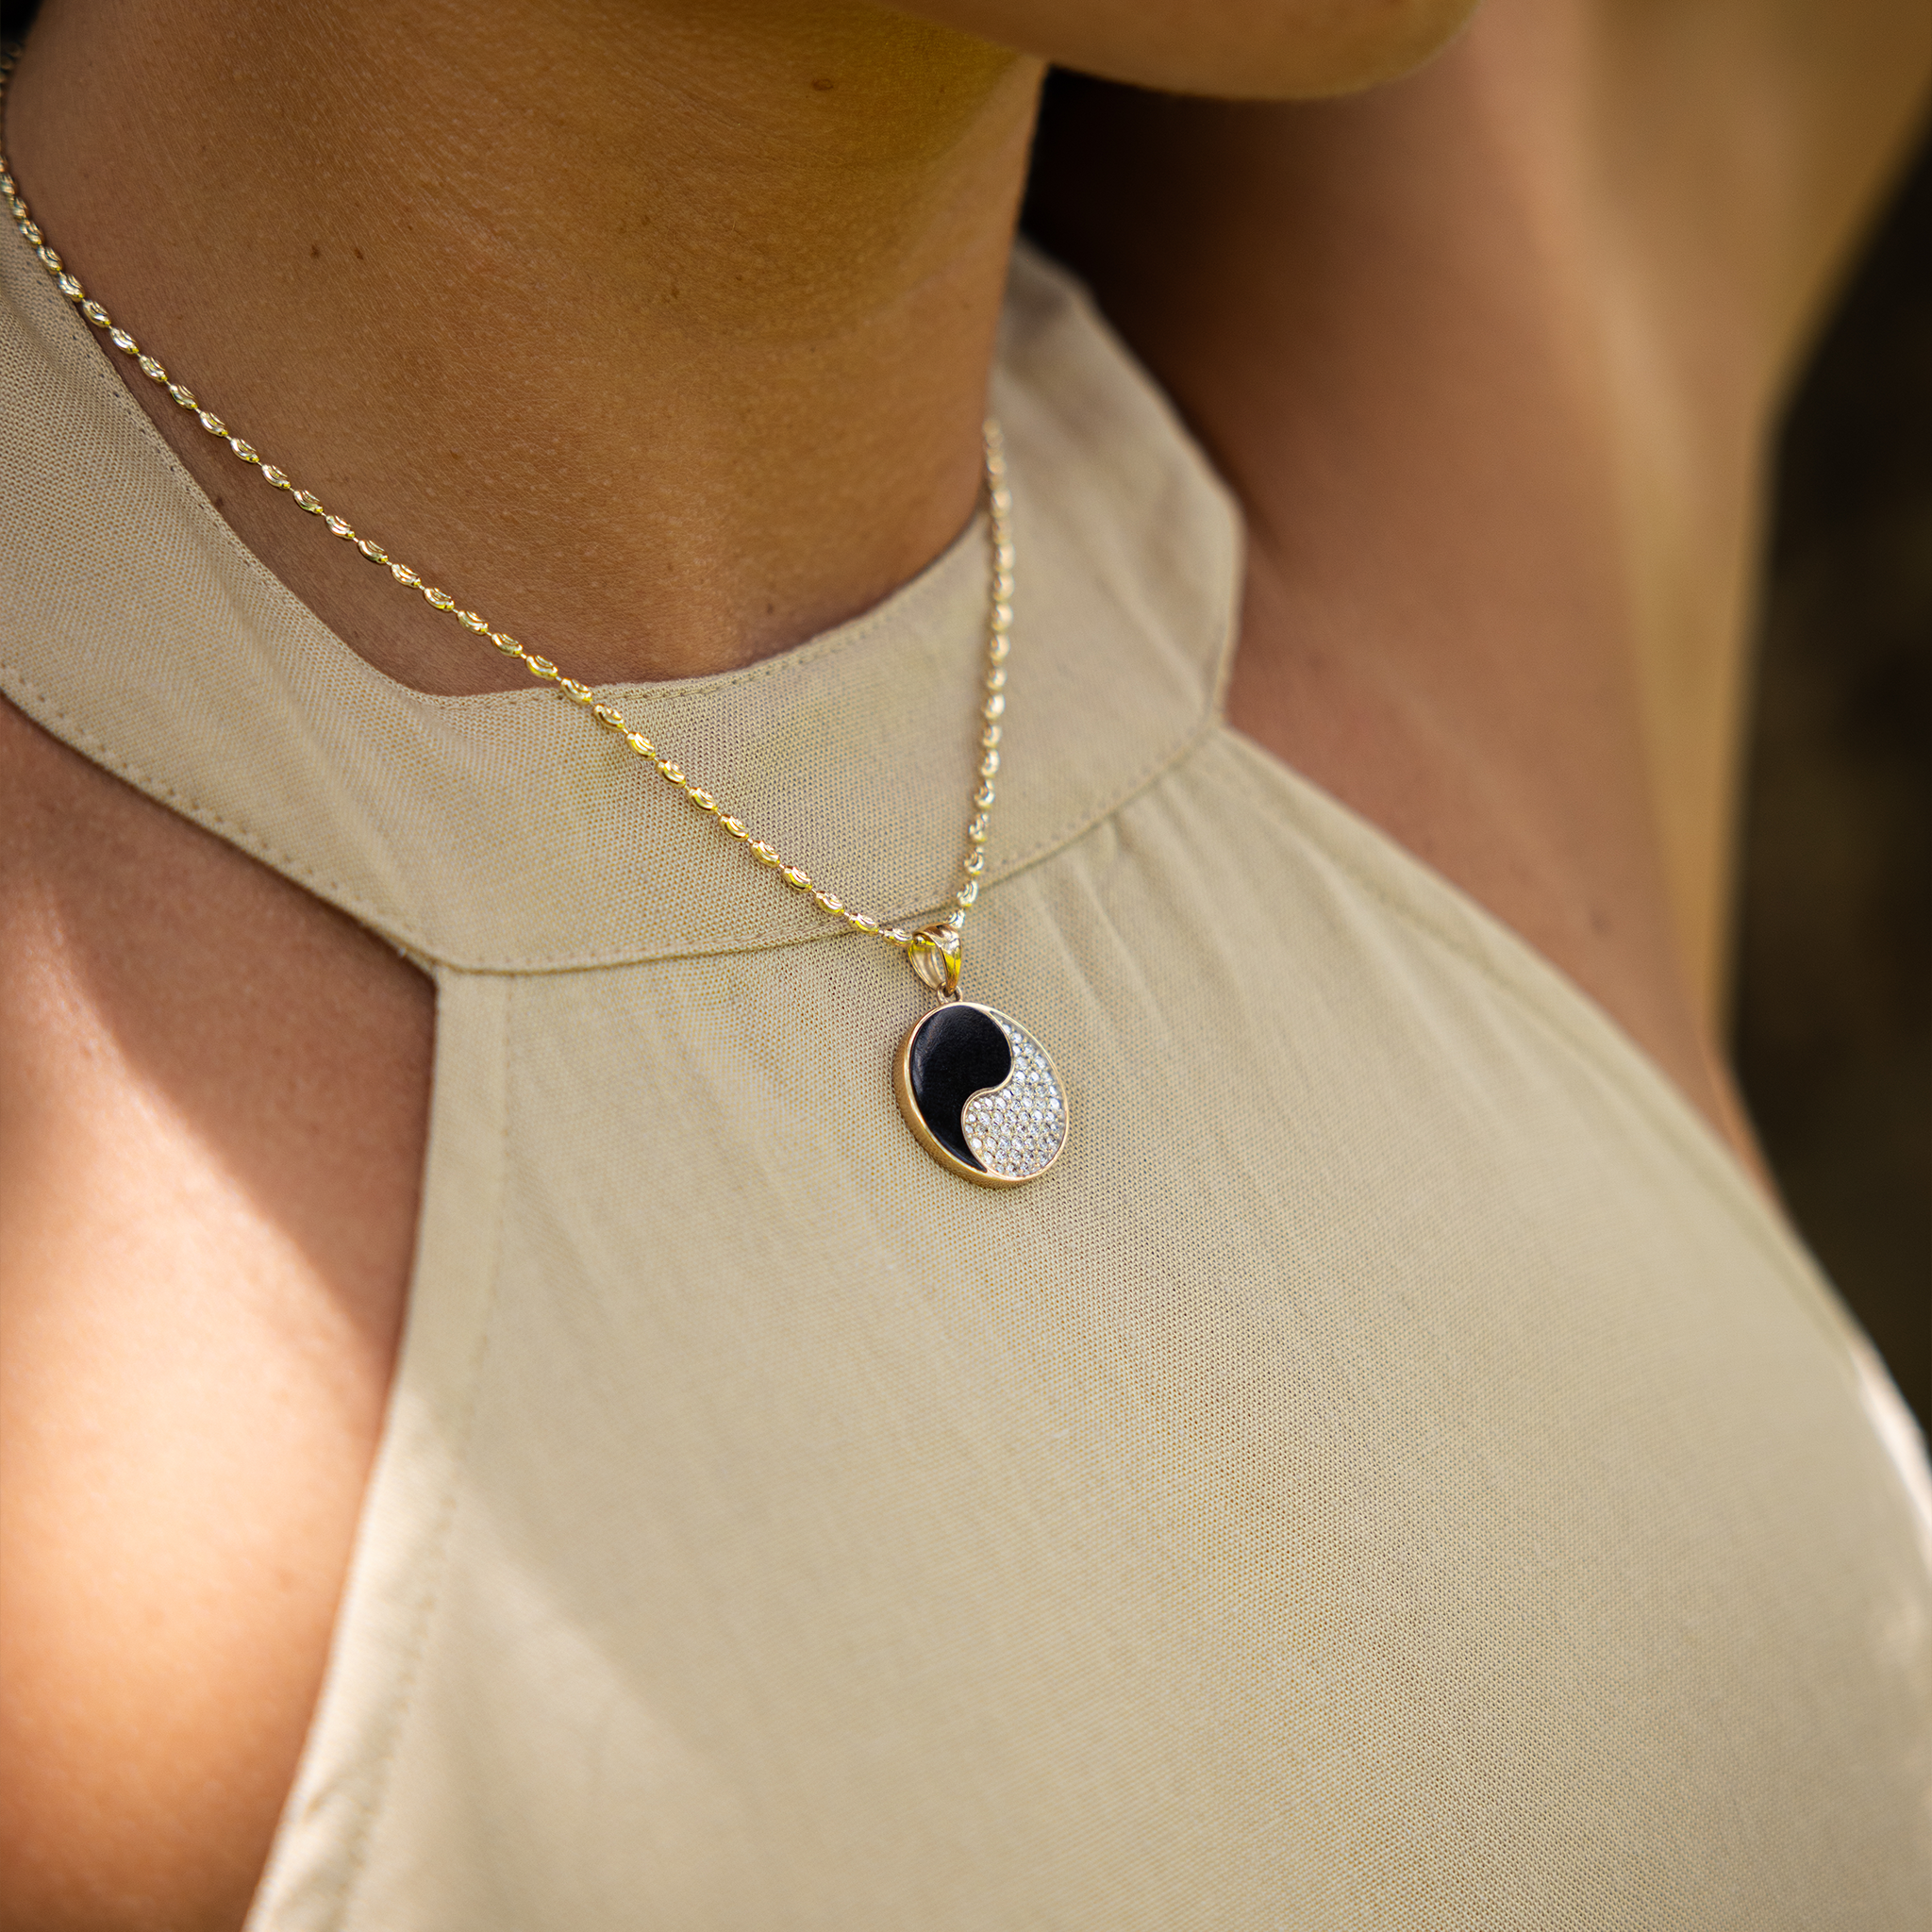 Yin Yang Black Coral Pendant with Diamonds in Gold - 19mm